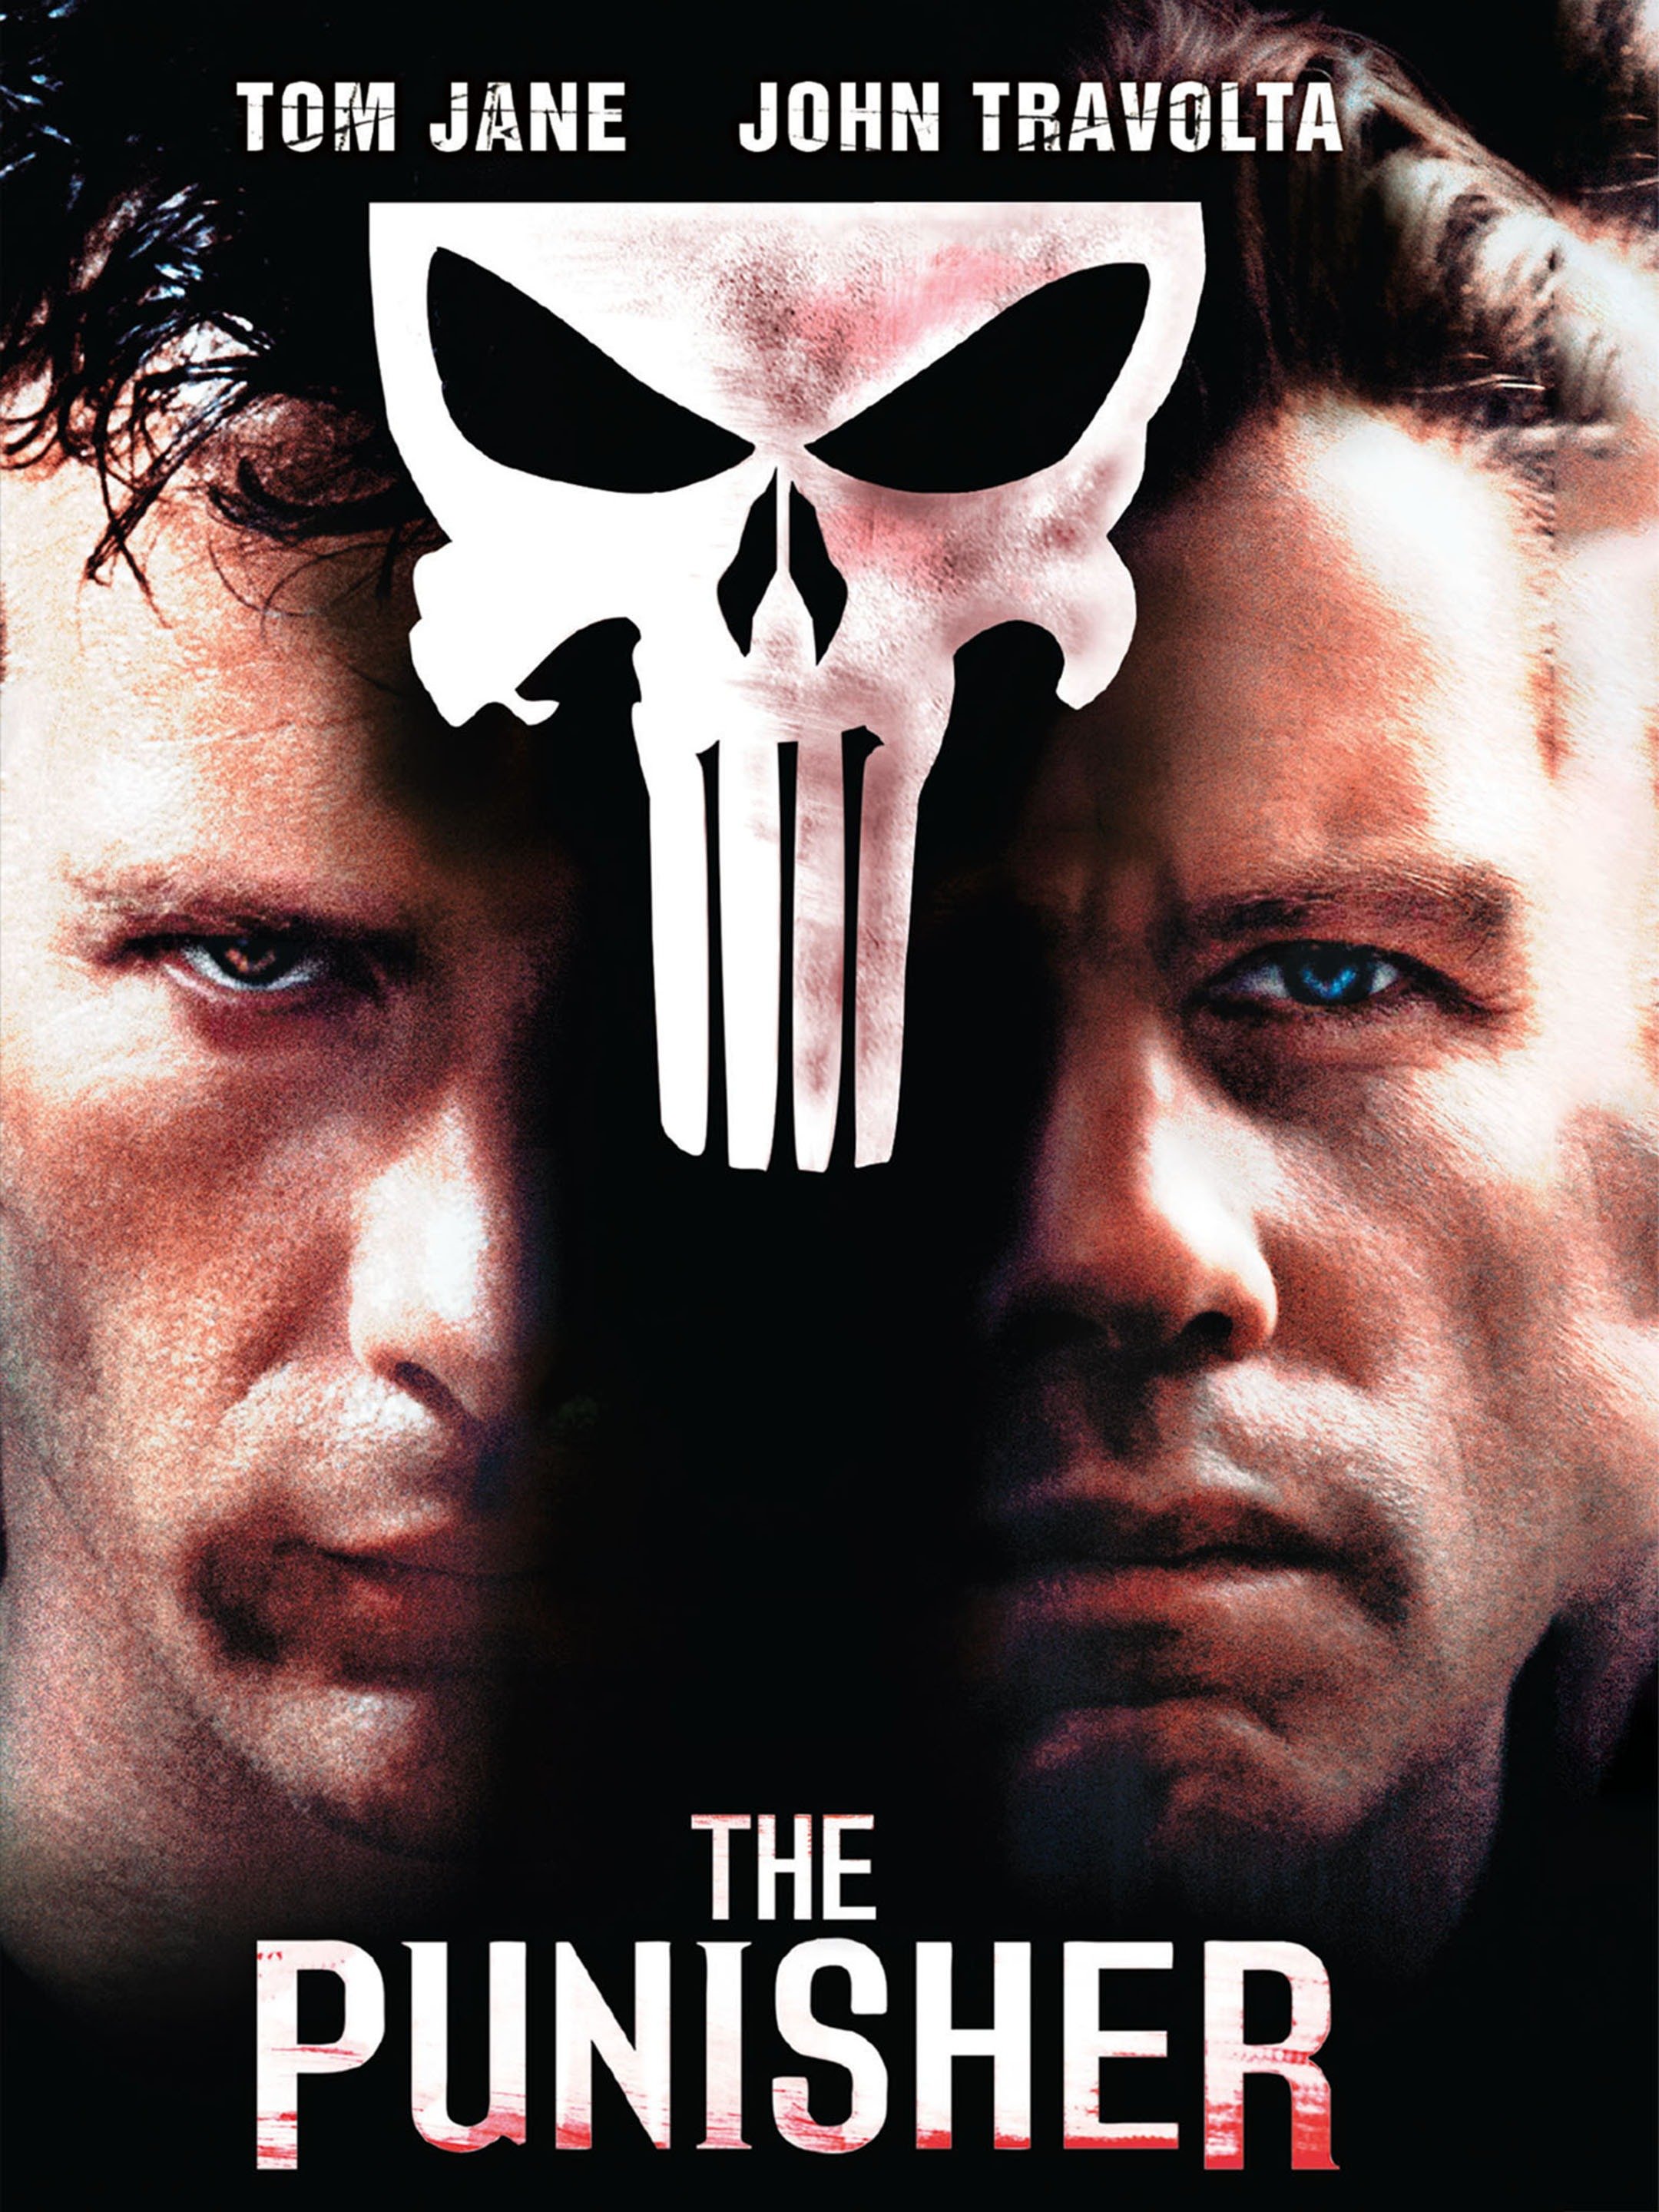 The Punisher Movie Reviews